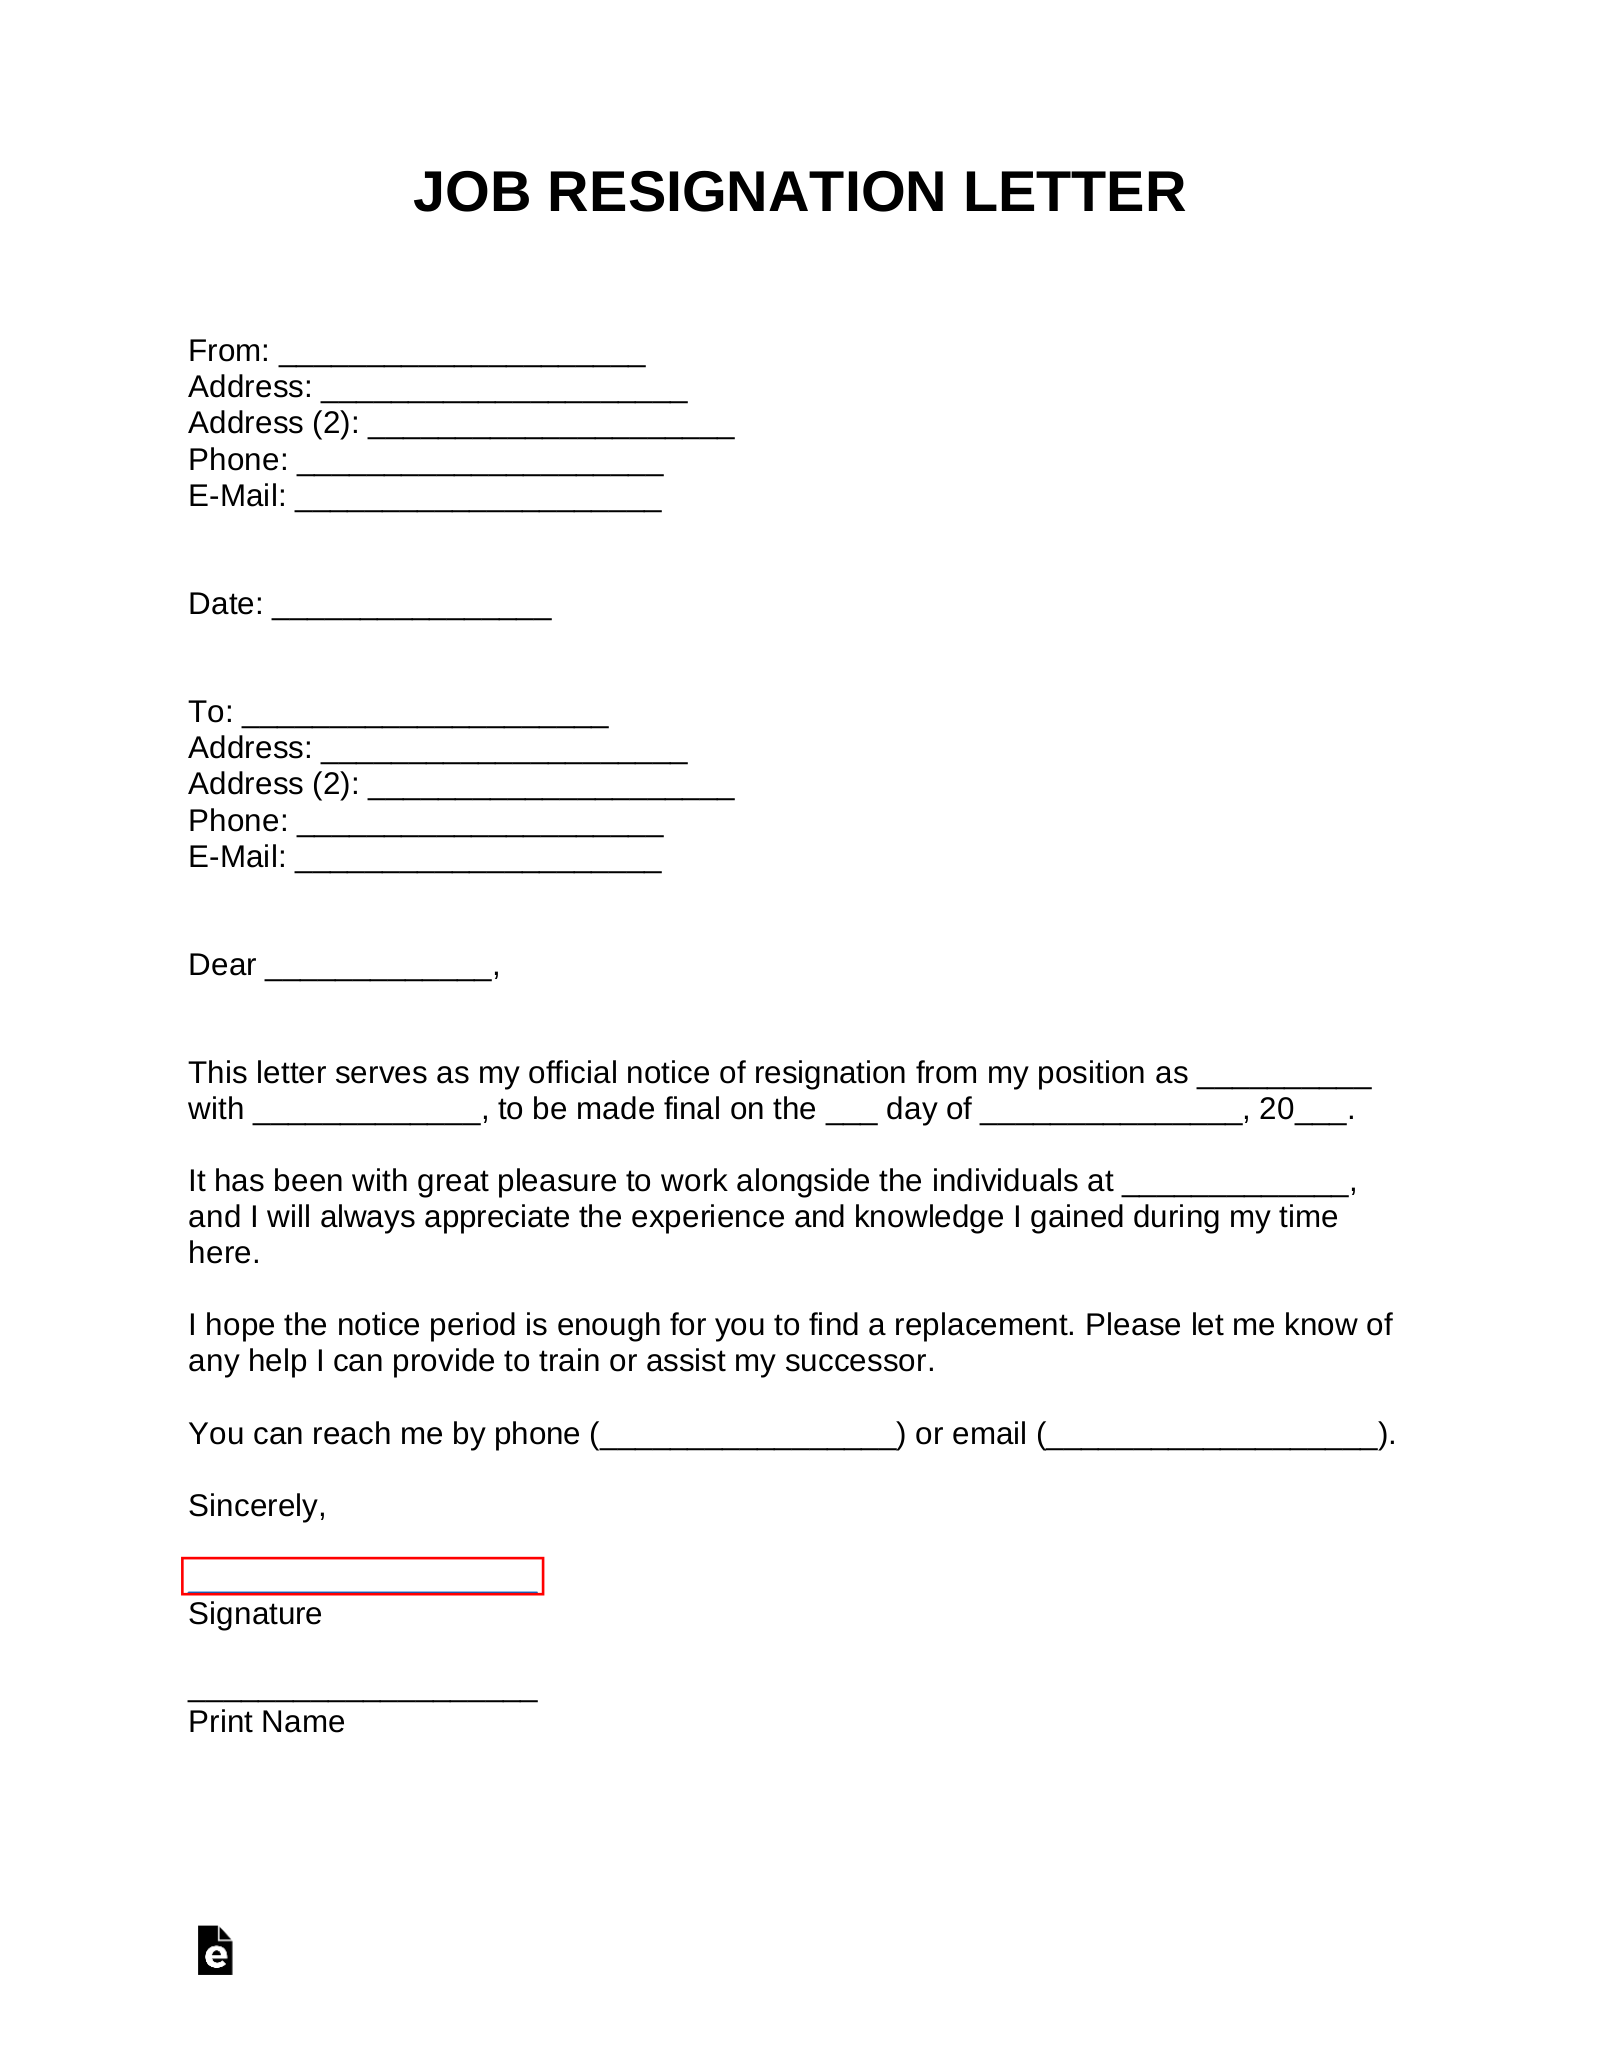 30-day-resignation-letter-template